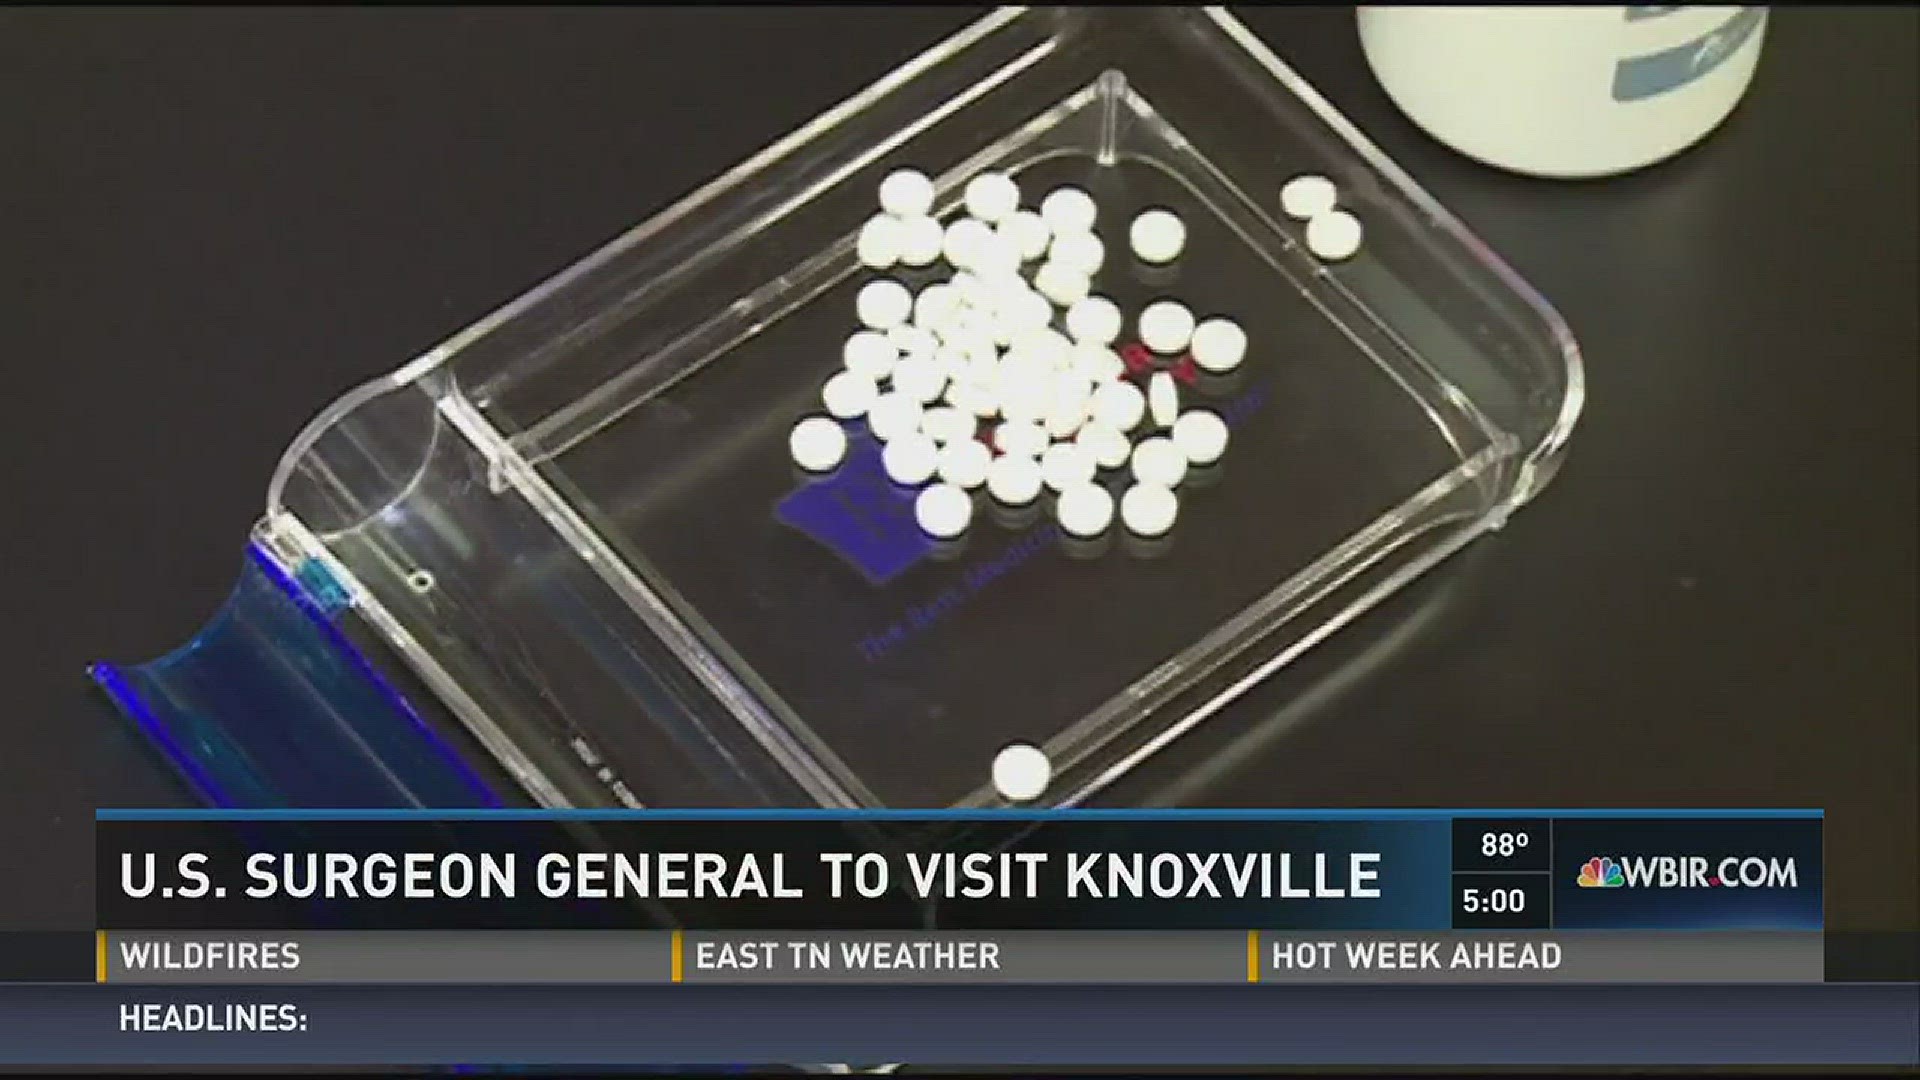 The U.S. Surgeon General will visit Knoxville, part of an effort to combat opioid drug addiction. Our region is one of the worst hit.